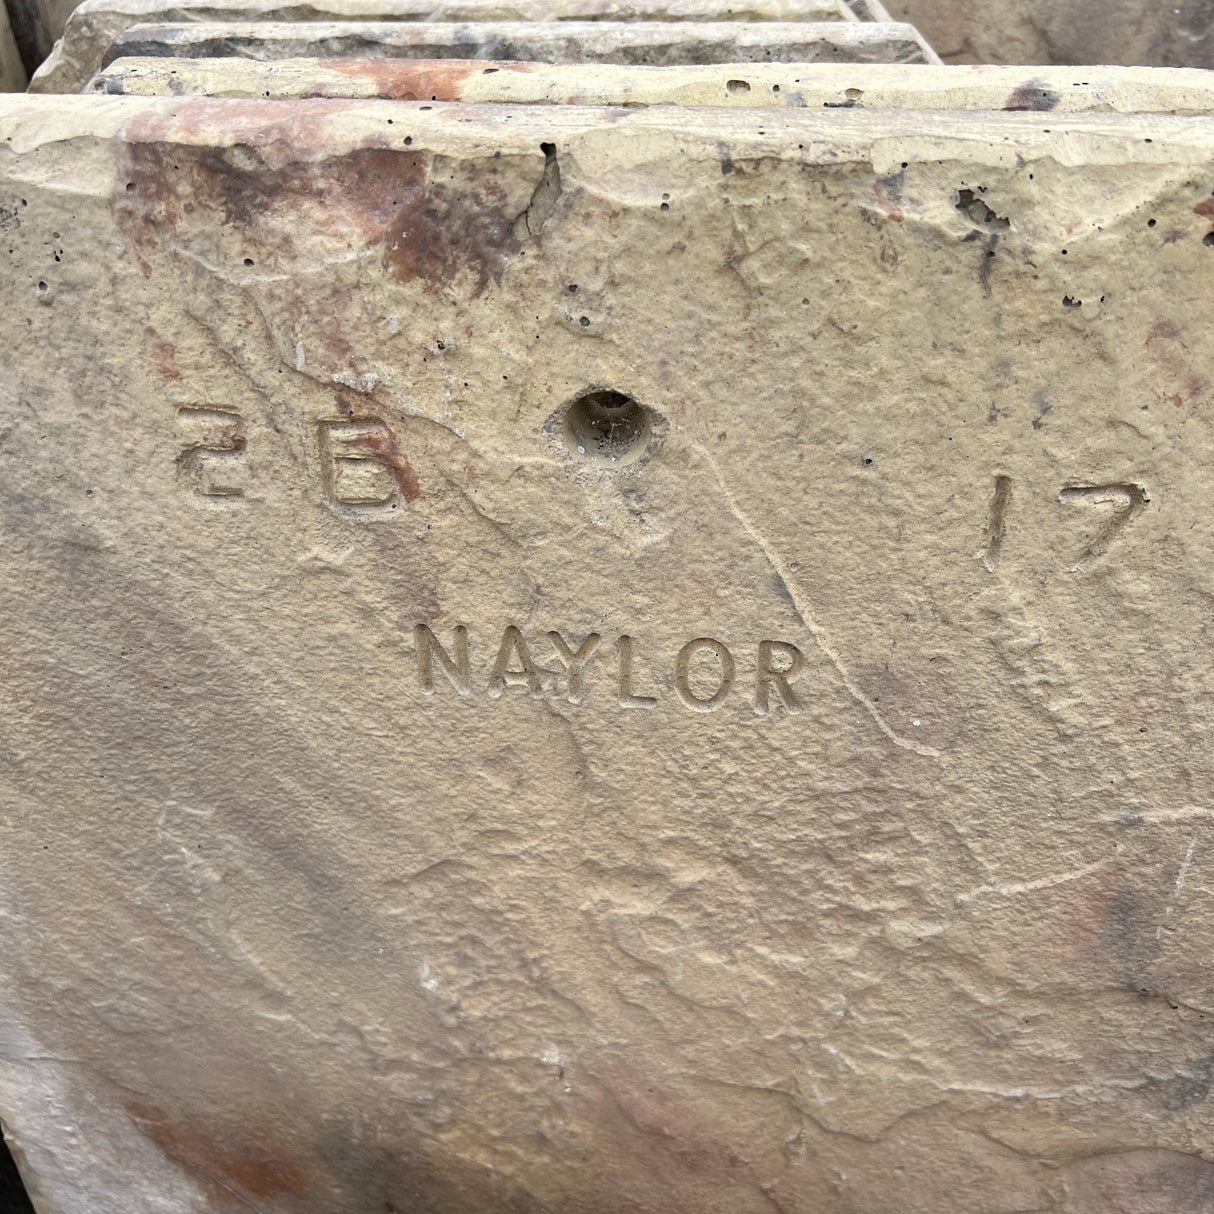 Reclaim Naylor Concrete Roof Tiles - Reclaimed Brick Company